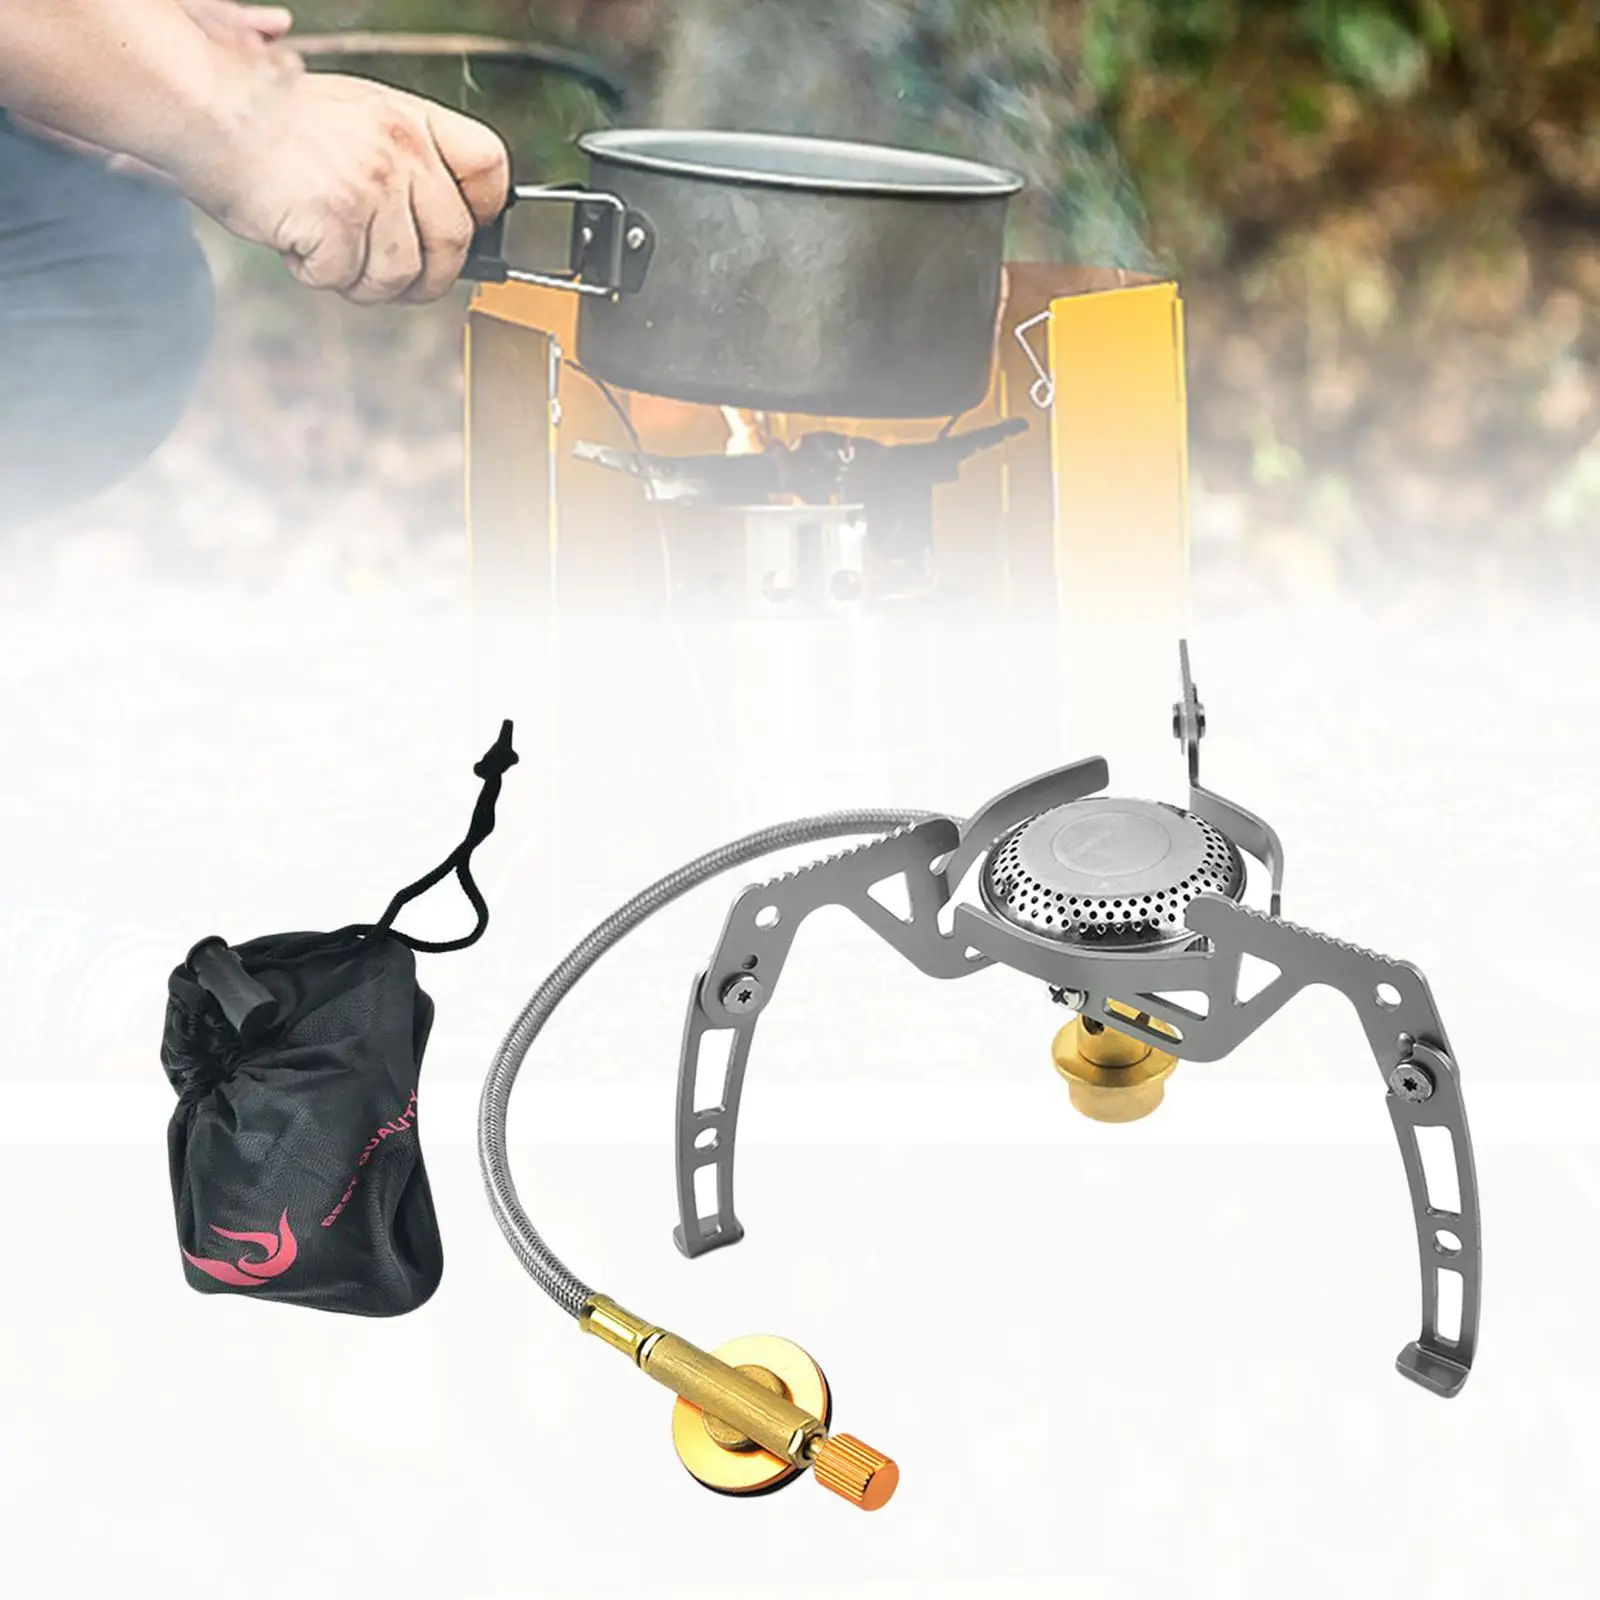 Camp Stove Camping Gas Stove Split Burner Collapsible Adjustable for 